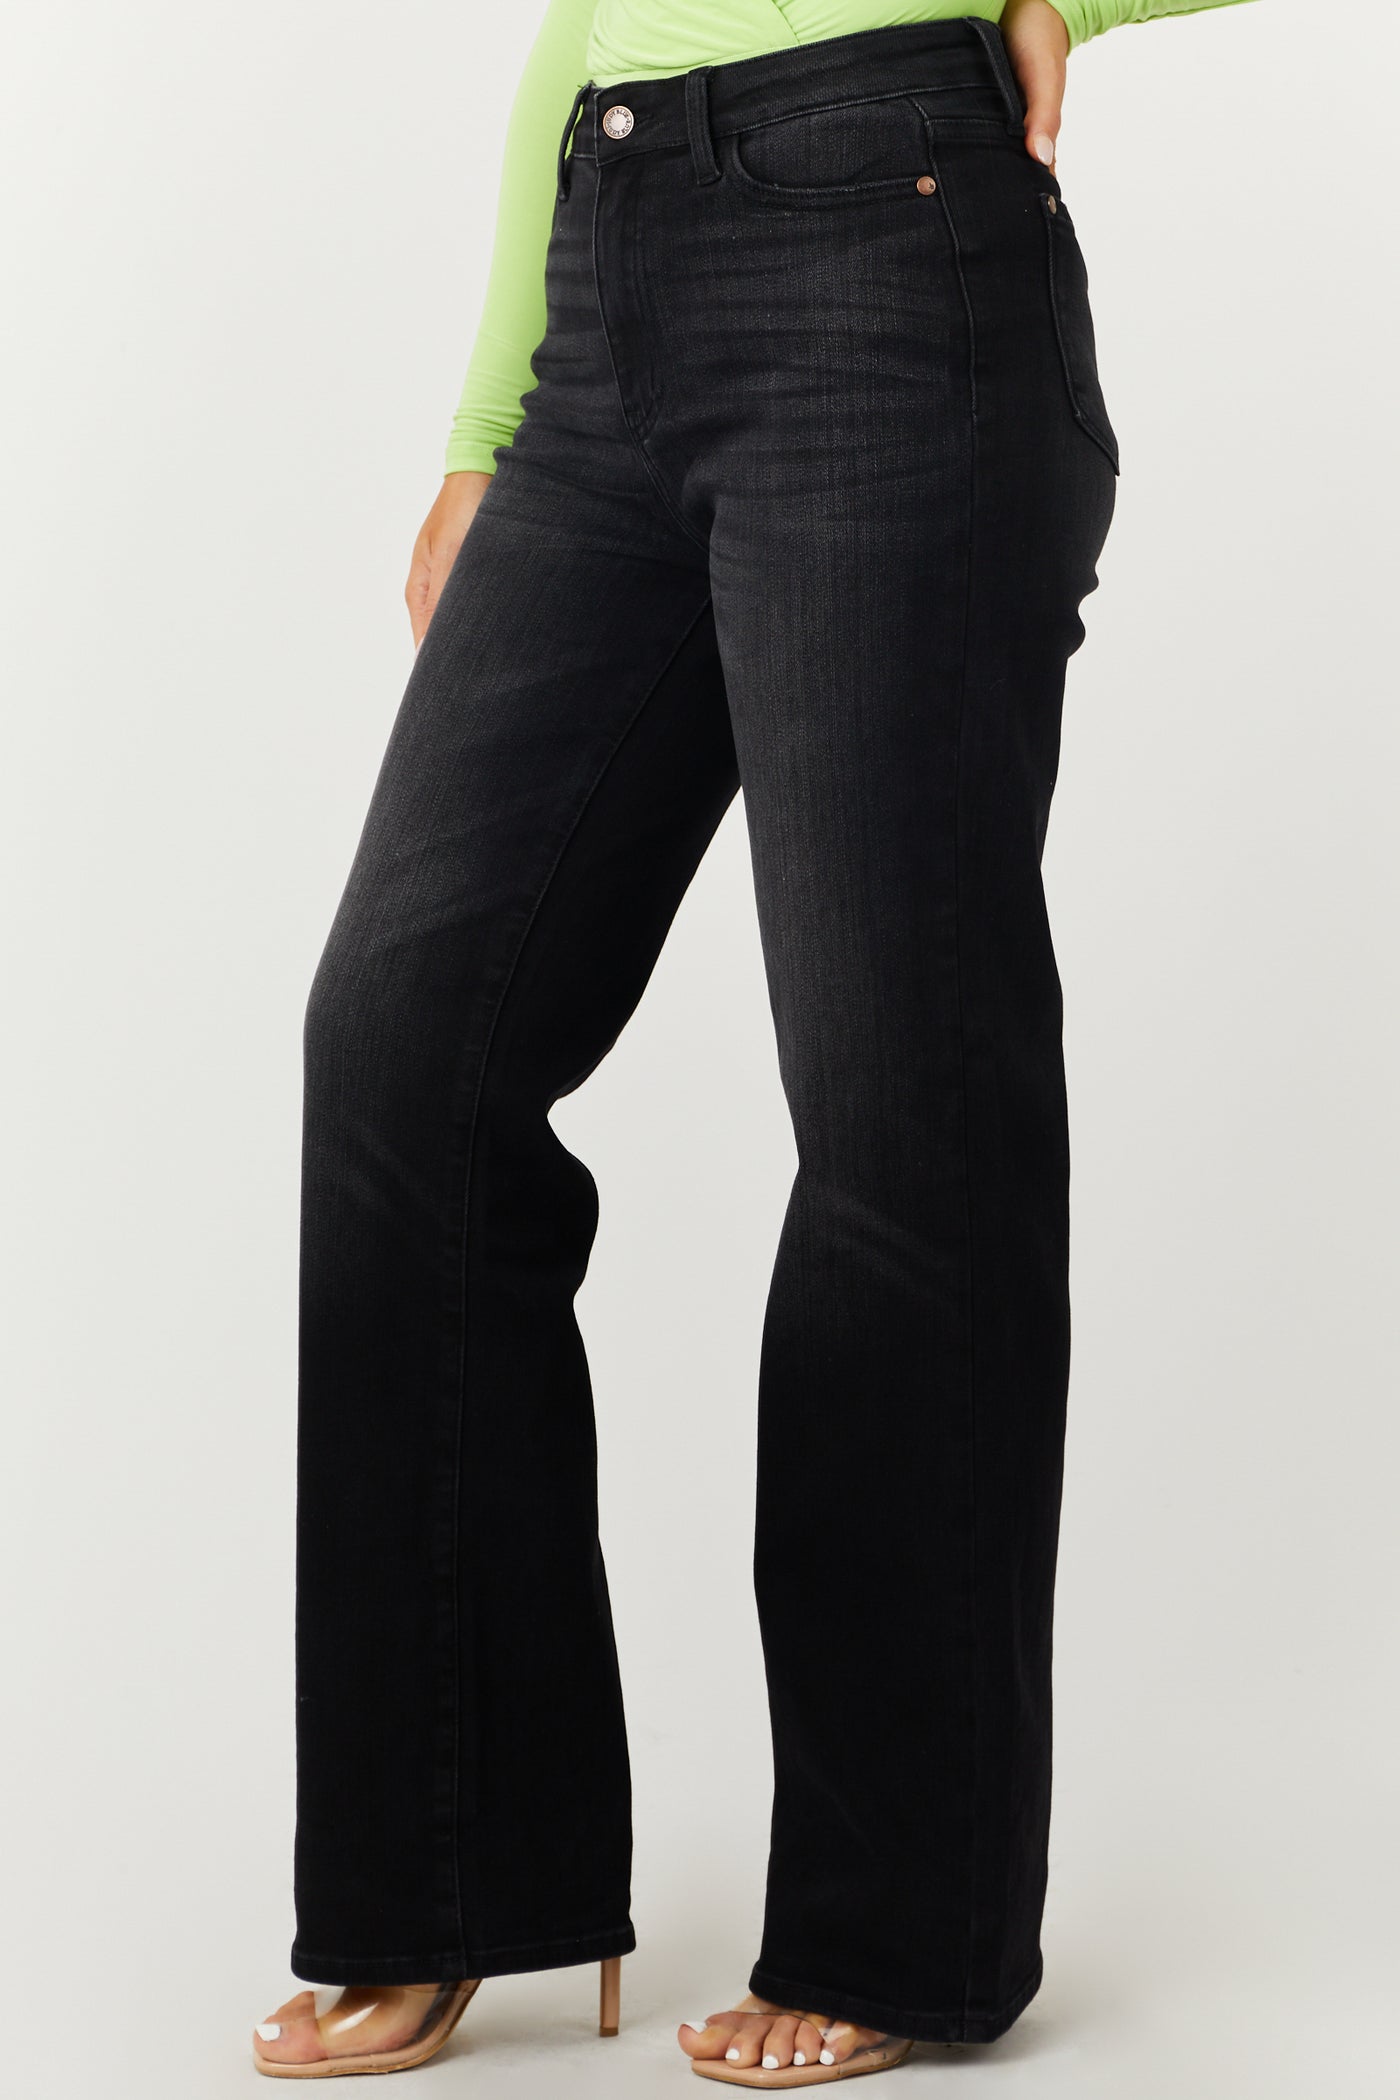 Washed Black High Rise Straight Leg Jeans